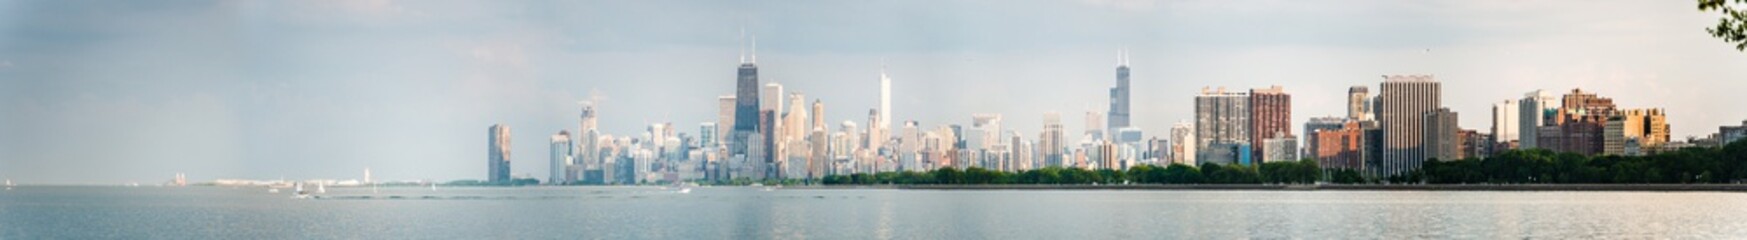 Gorgeous panoramic view of the Chicago skyline including new and old skyscrapers across the water of Lake Michigan.